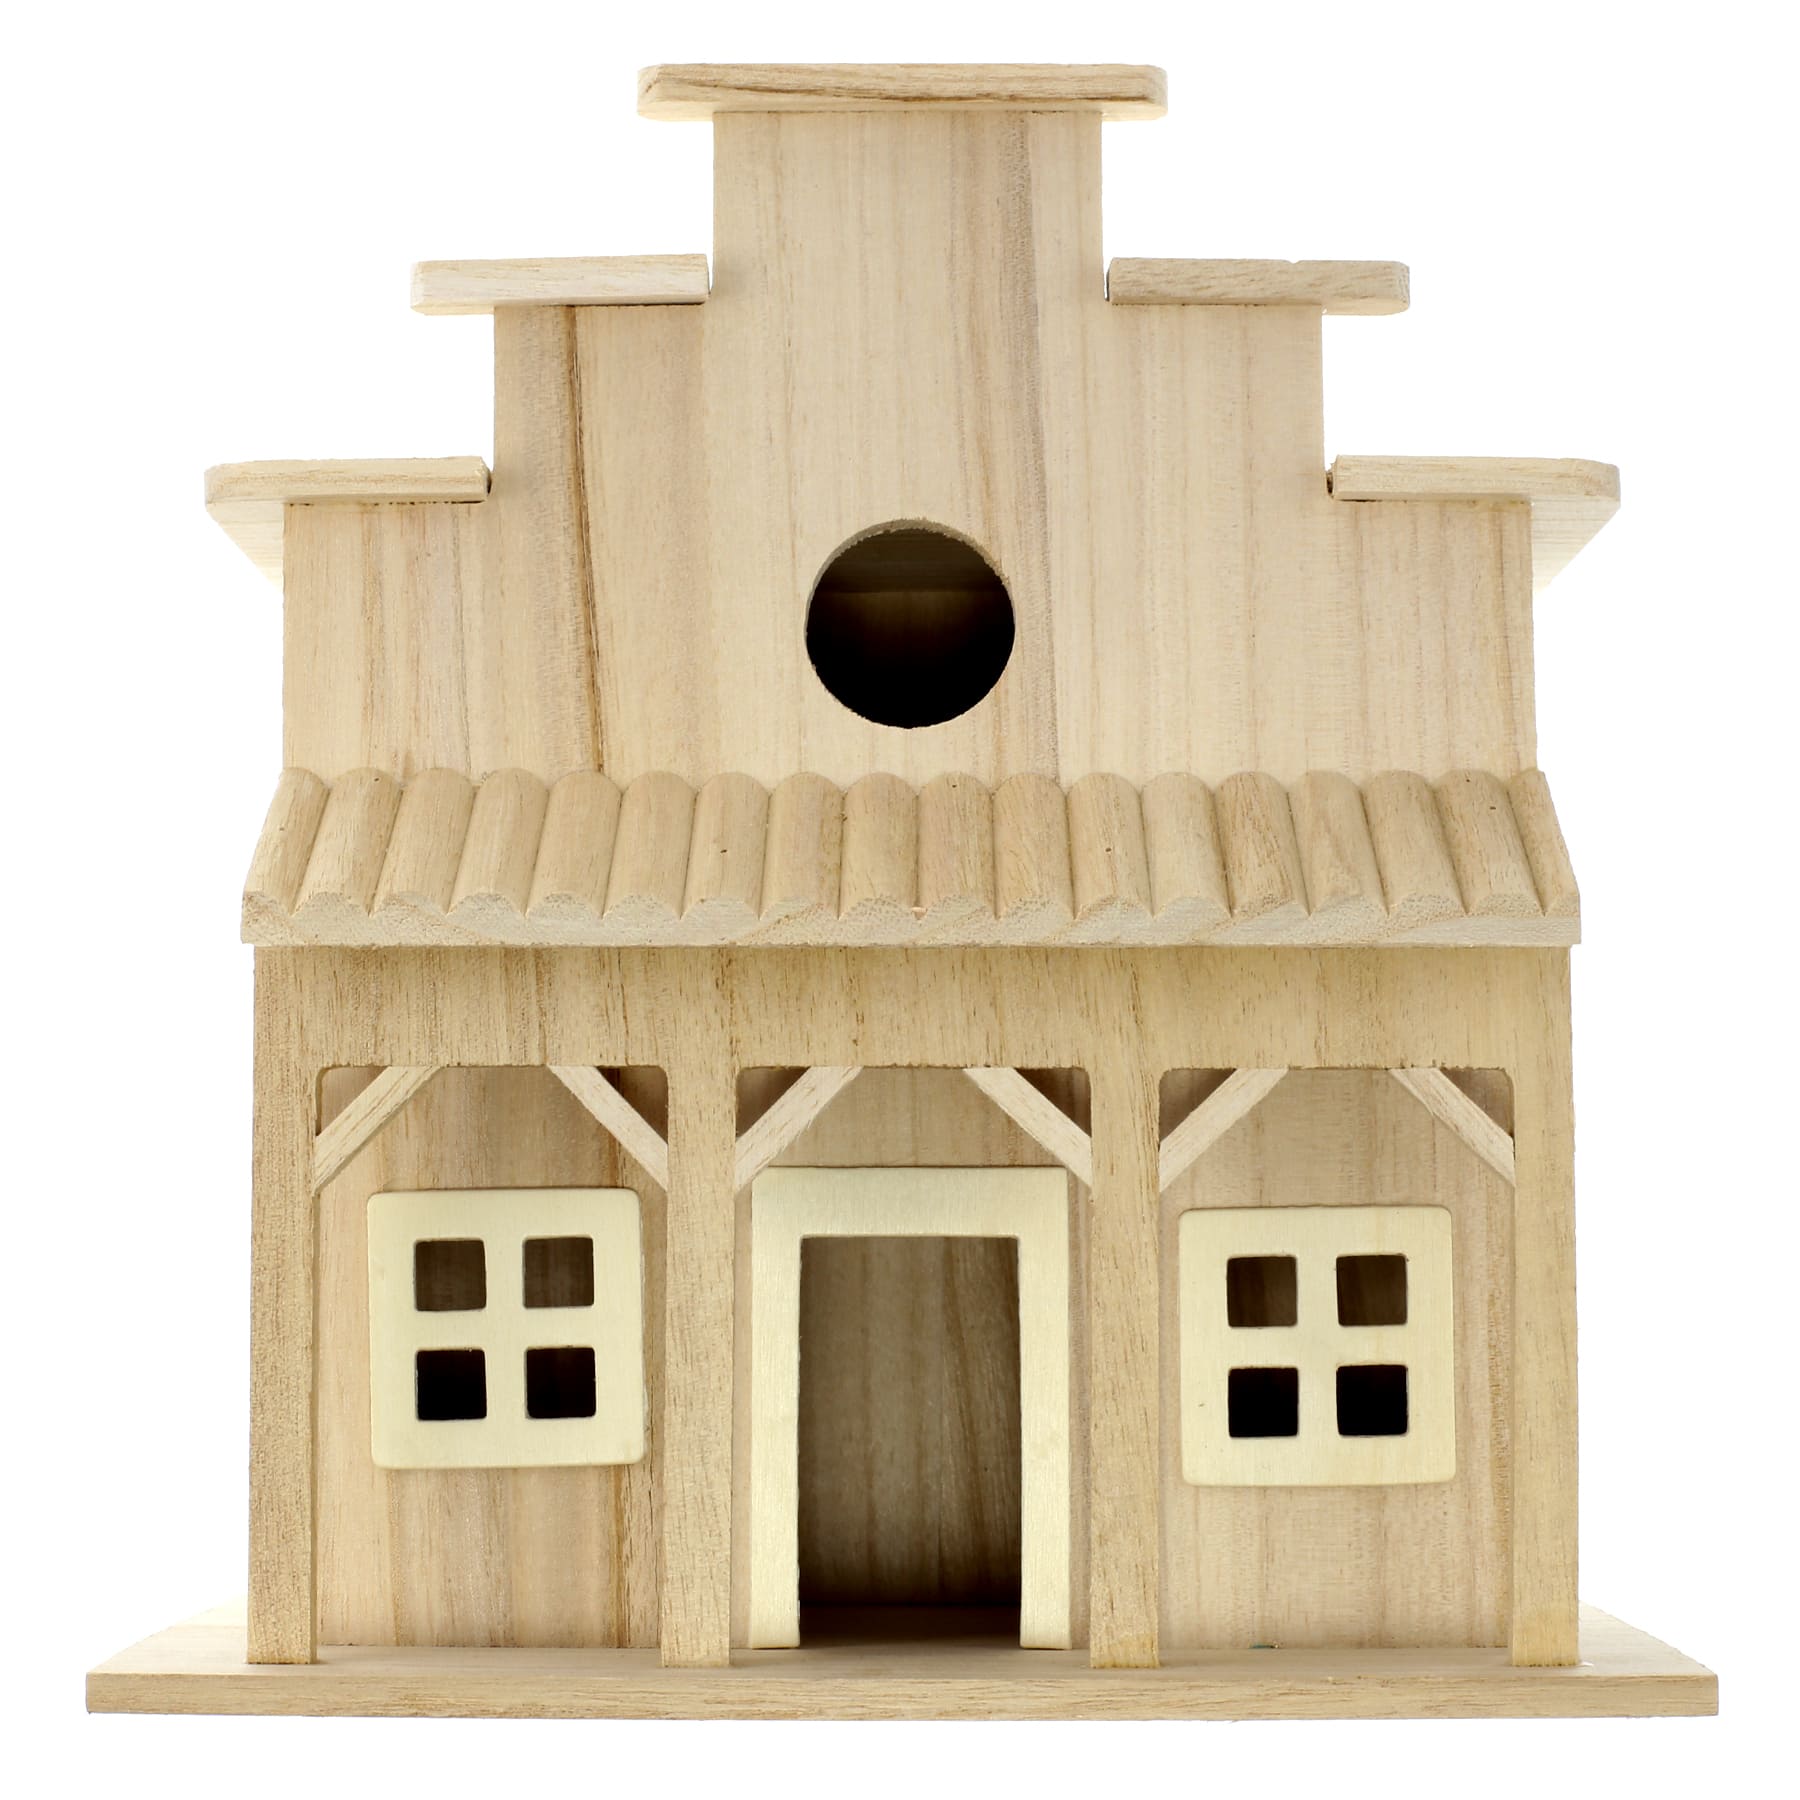 Find the Saloon Wooden Birdhouse by ArtMinds® at Michaels